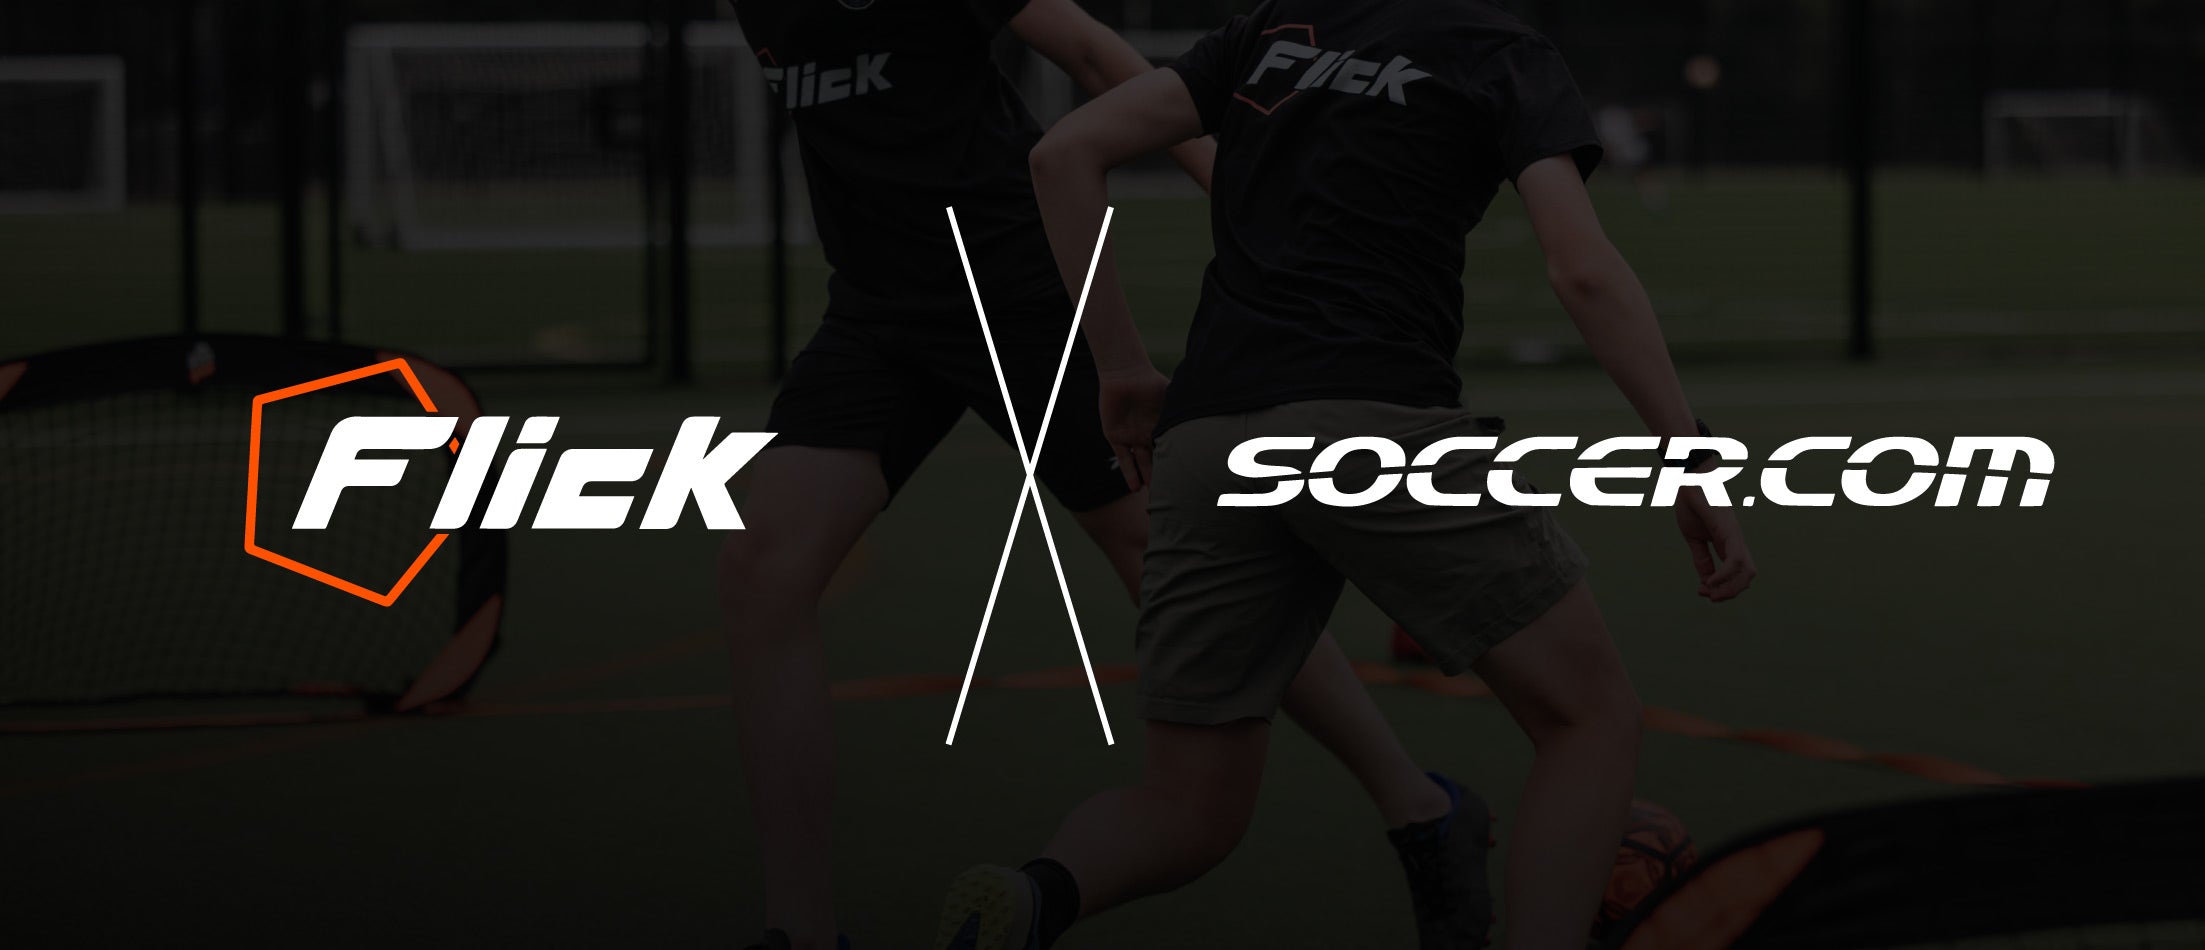 FLICK EXTEND RETAIL PARTNERSHIP WITH SOCCER.COM